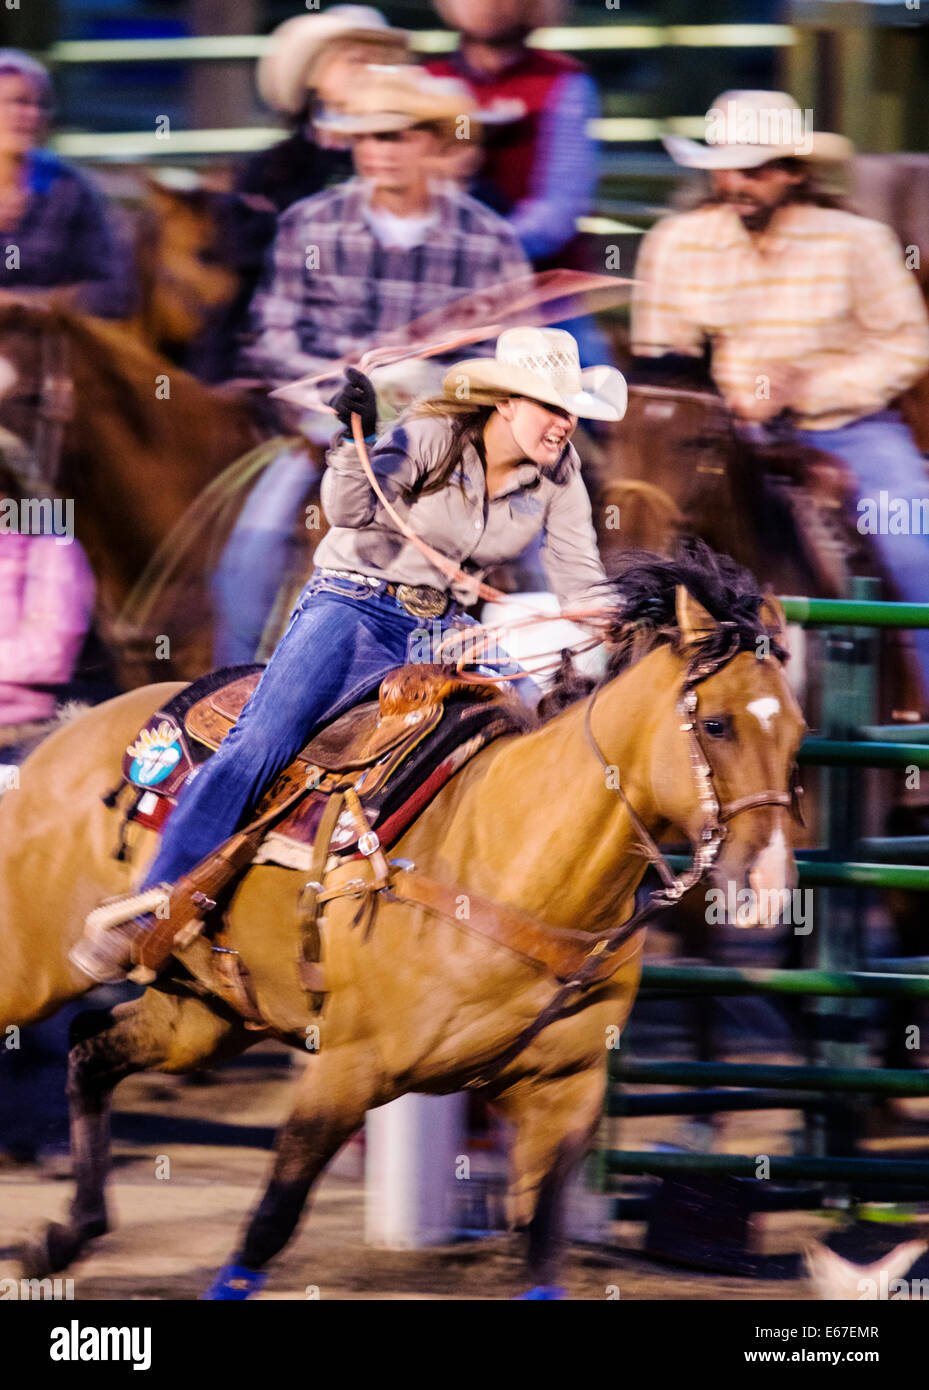 Cowgirl on horseback competes in the tie-down roping event, Chaffee County Fair & Rodeo Stock Photo